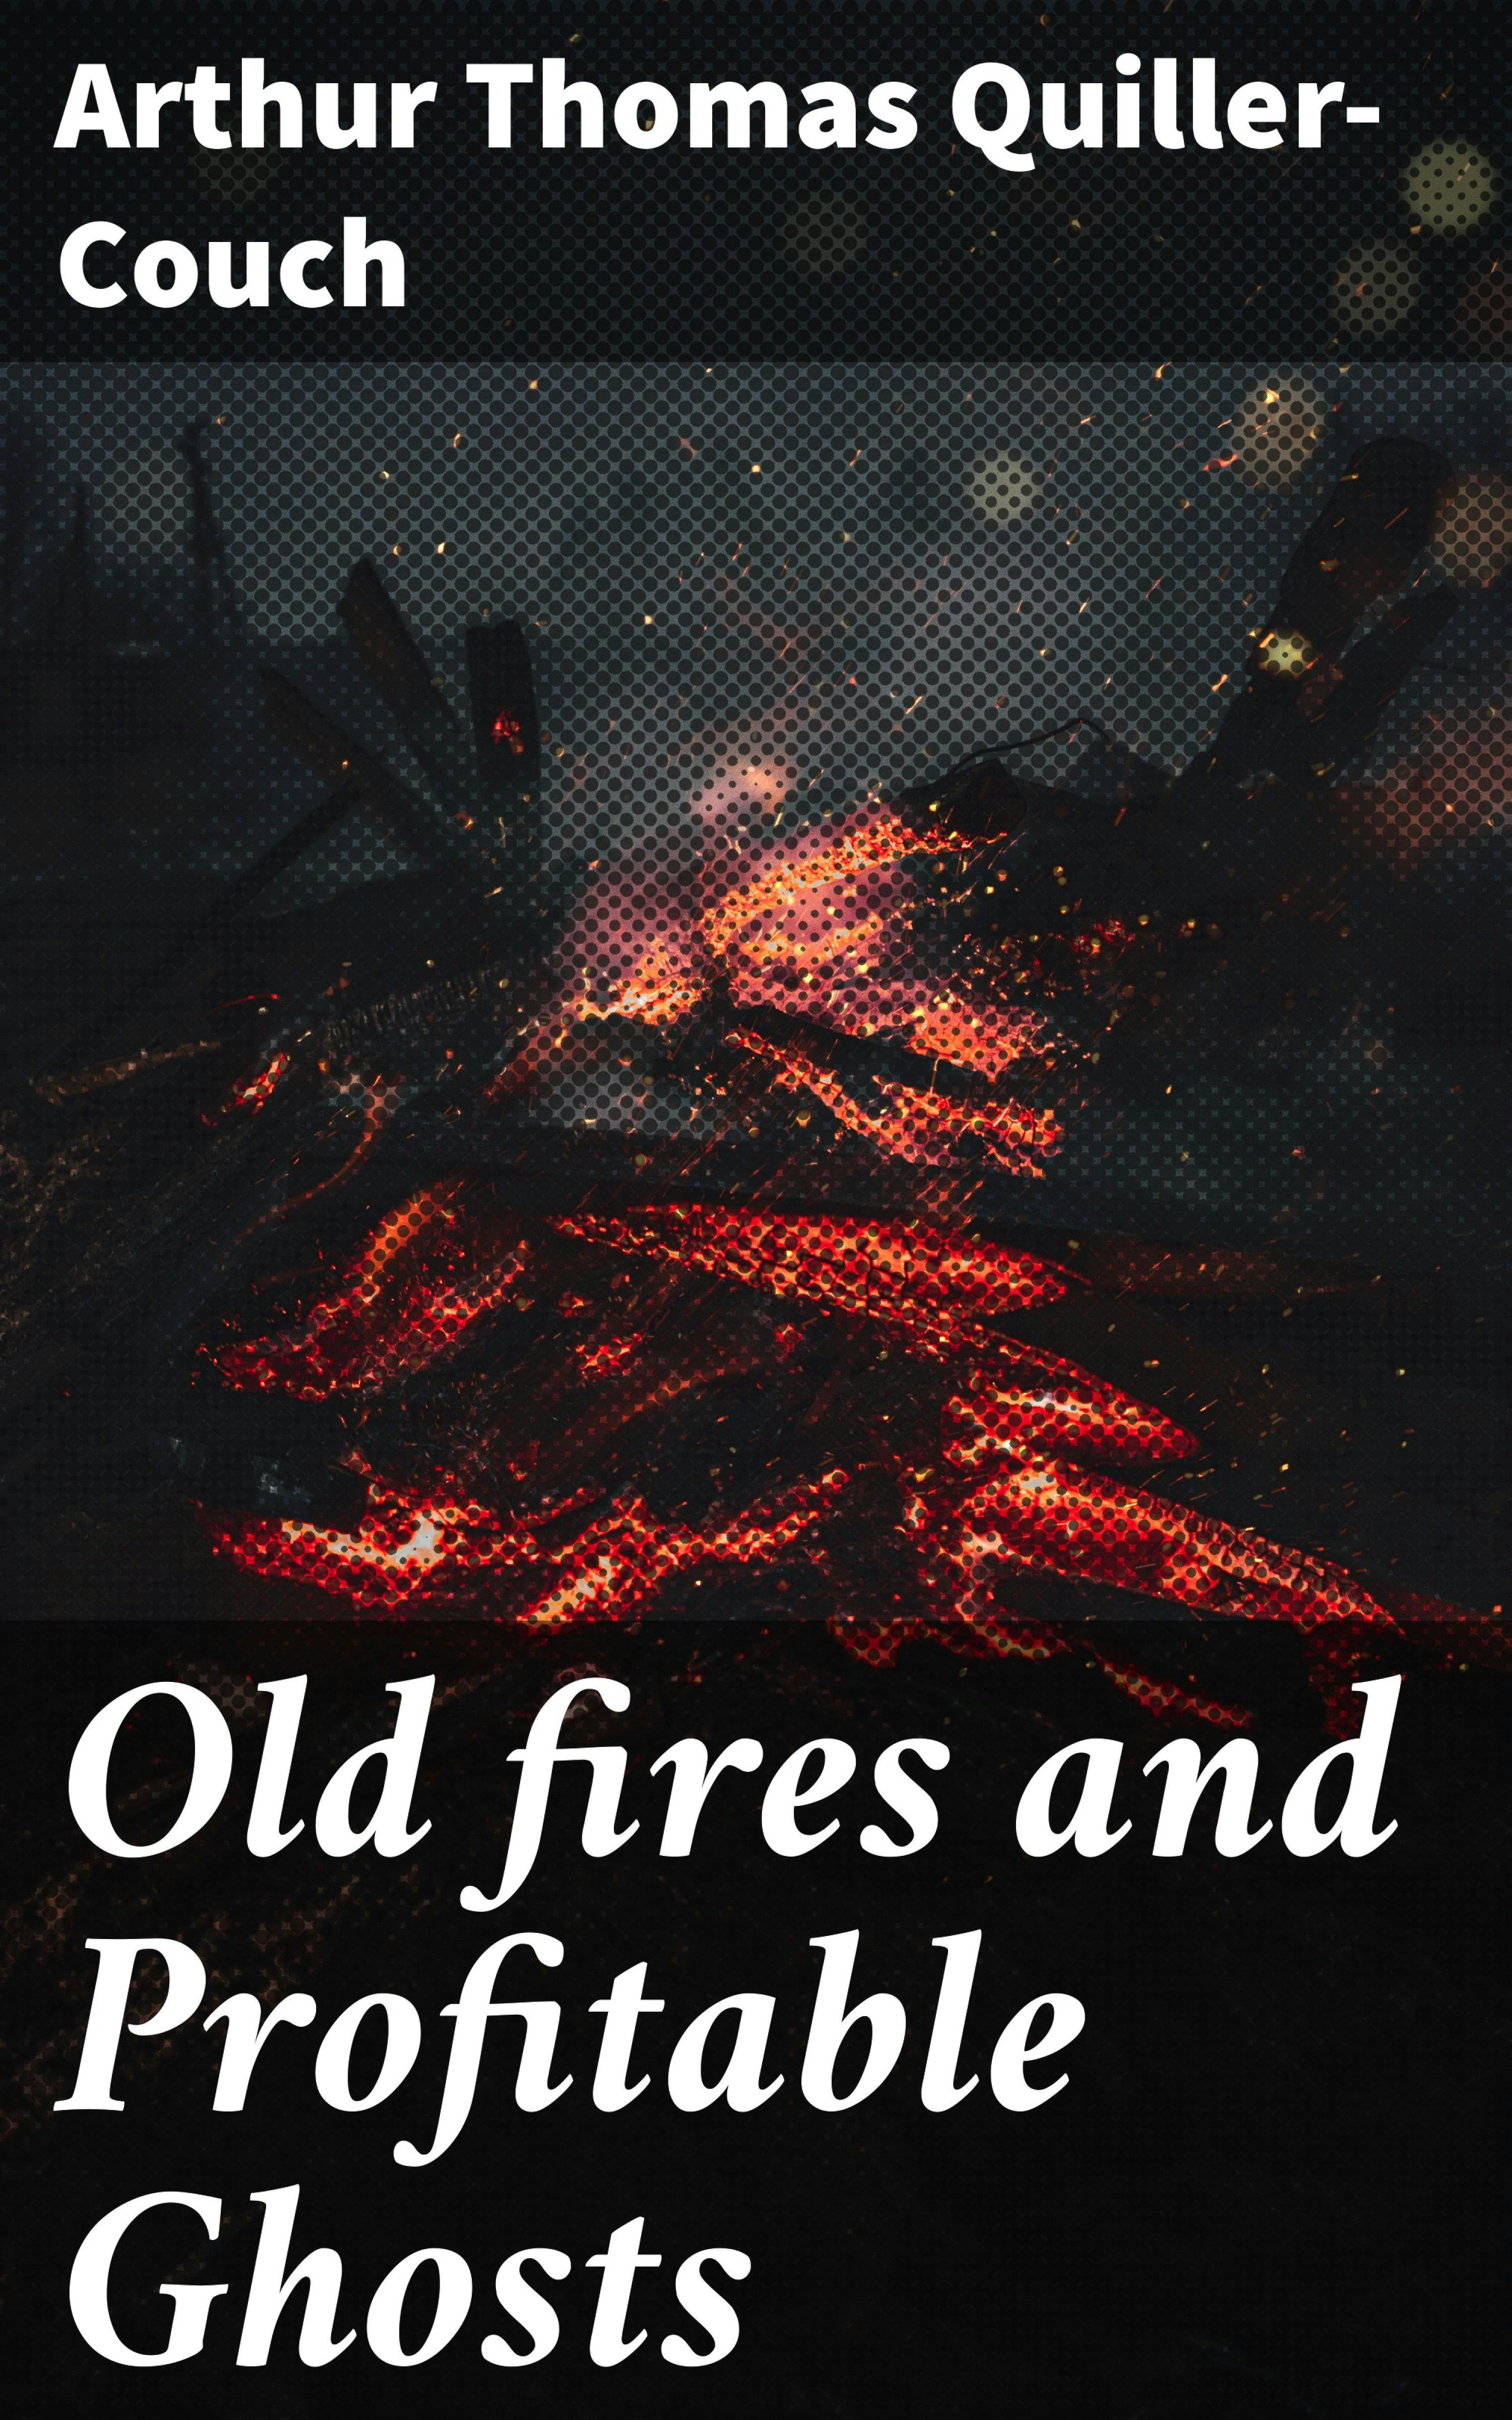 Old fires and Profitable Ghosts - Arthur Thomas Quiller-Couch